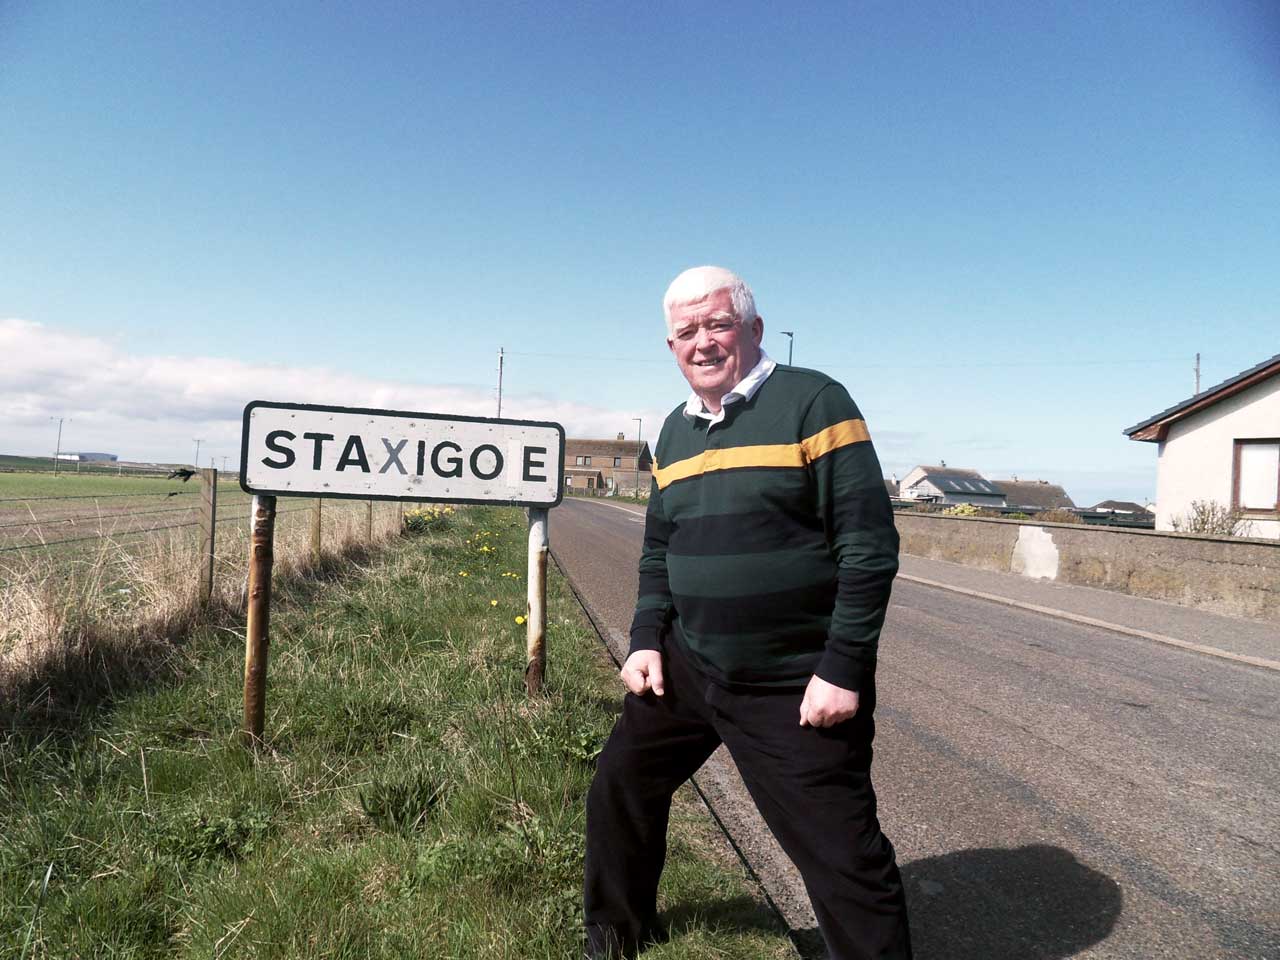 Photo: Staxigoe Saw Bill On The Campaign Trail in The Sunshine